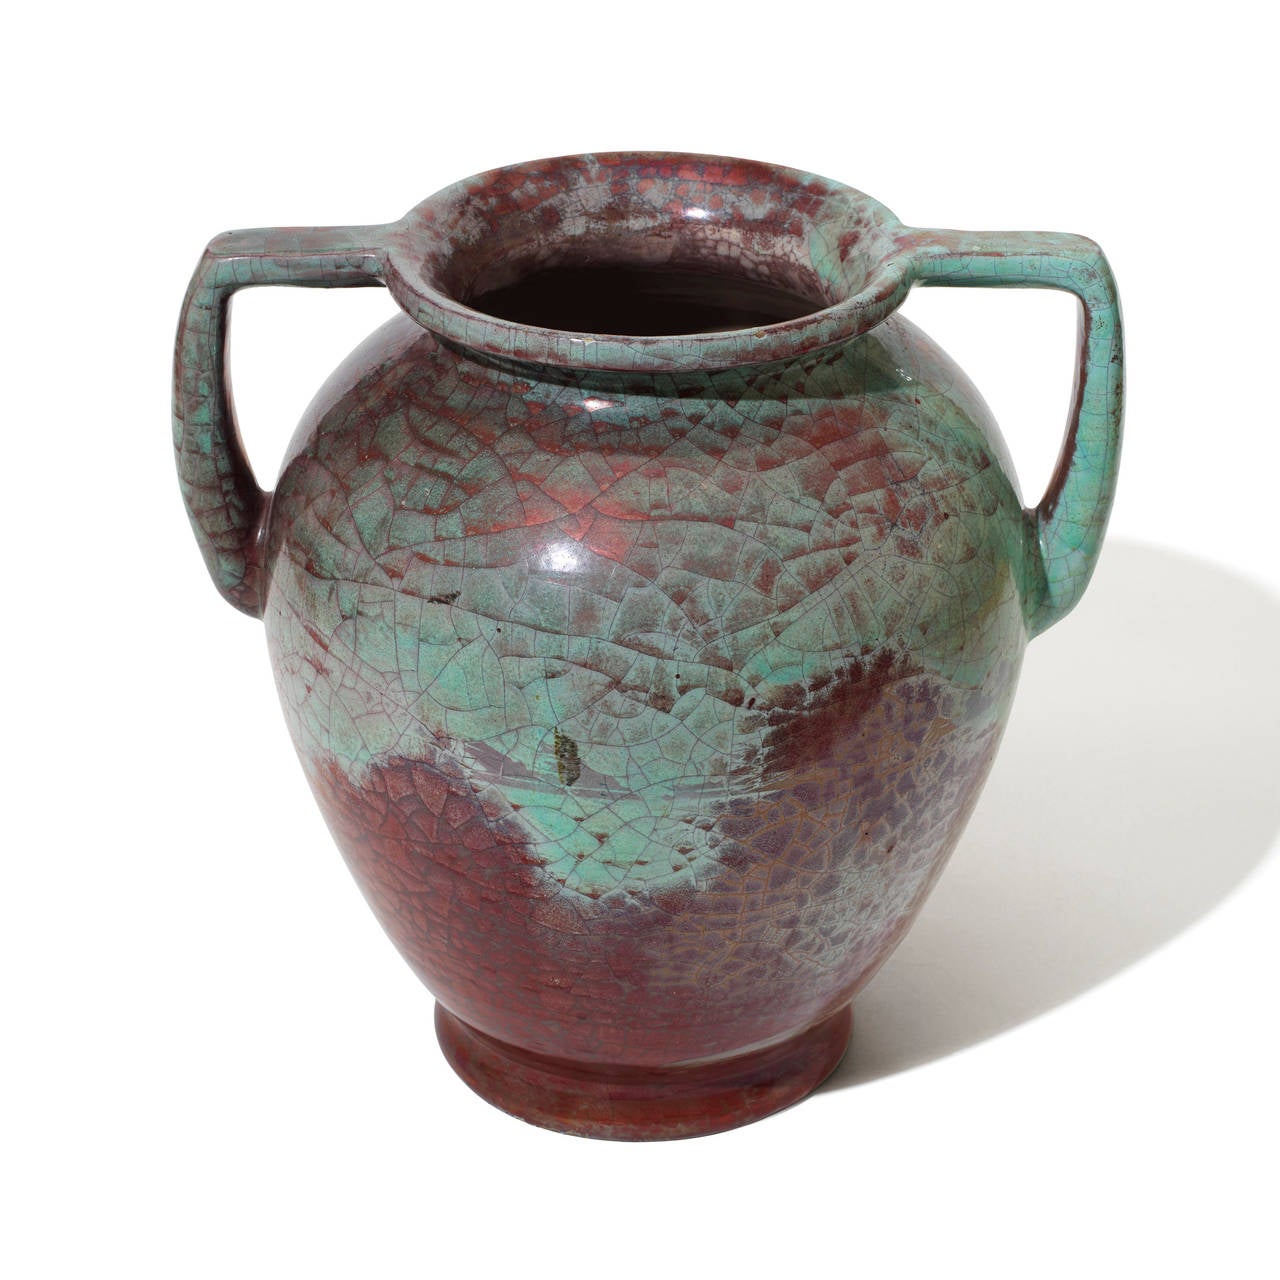 Exceptional monumental urn with handles in the Jugend style by Kähler, in stoneware with celadon and red luster glazes, Denmark, 1900s-1910s. Incised “HAK” mark underside. The red luster glaze used on this piece was a Kähler trademark when it